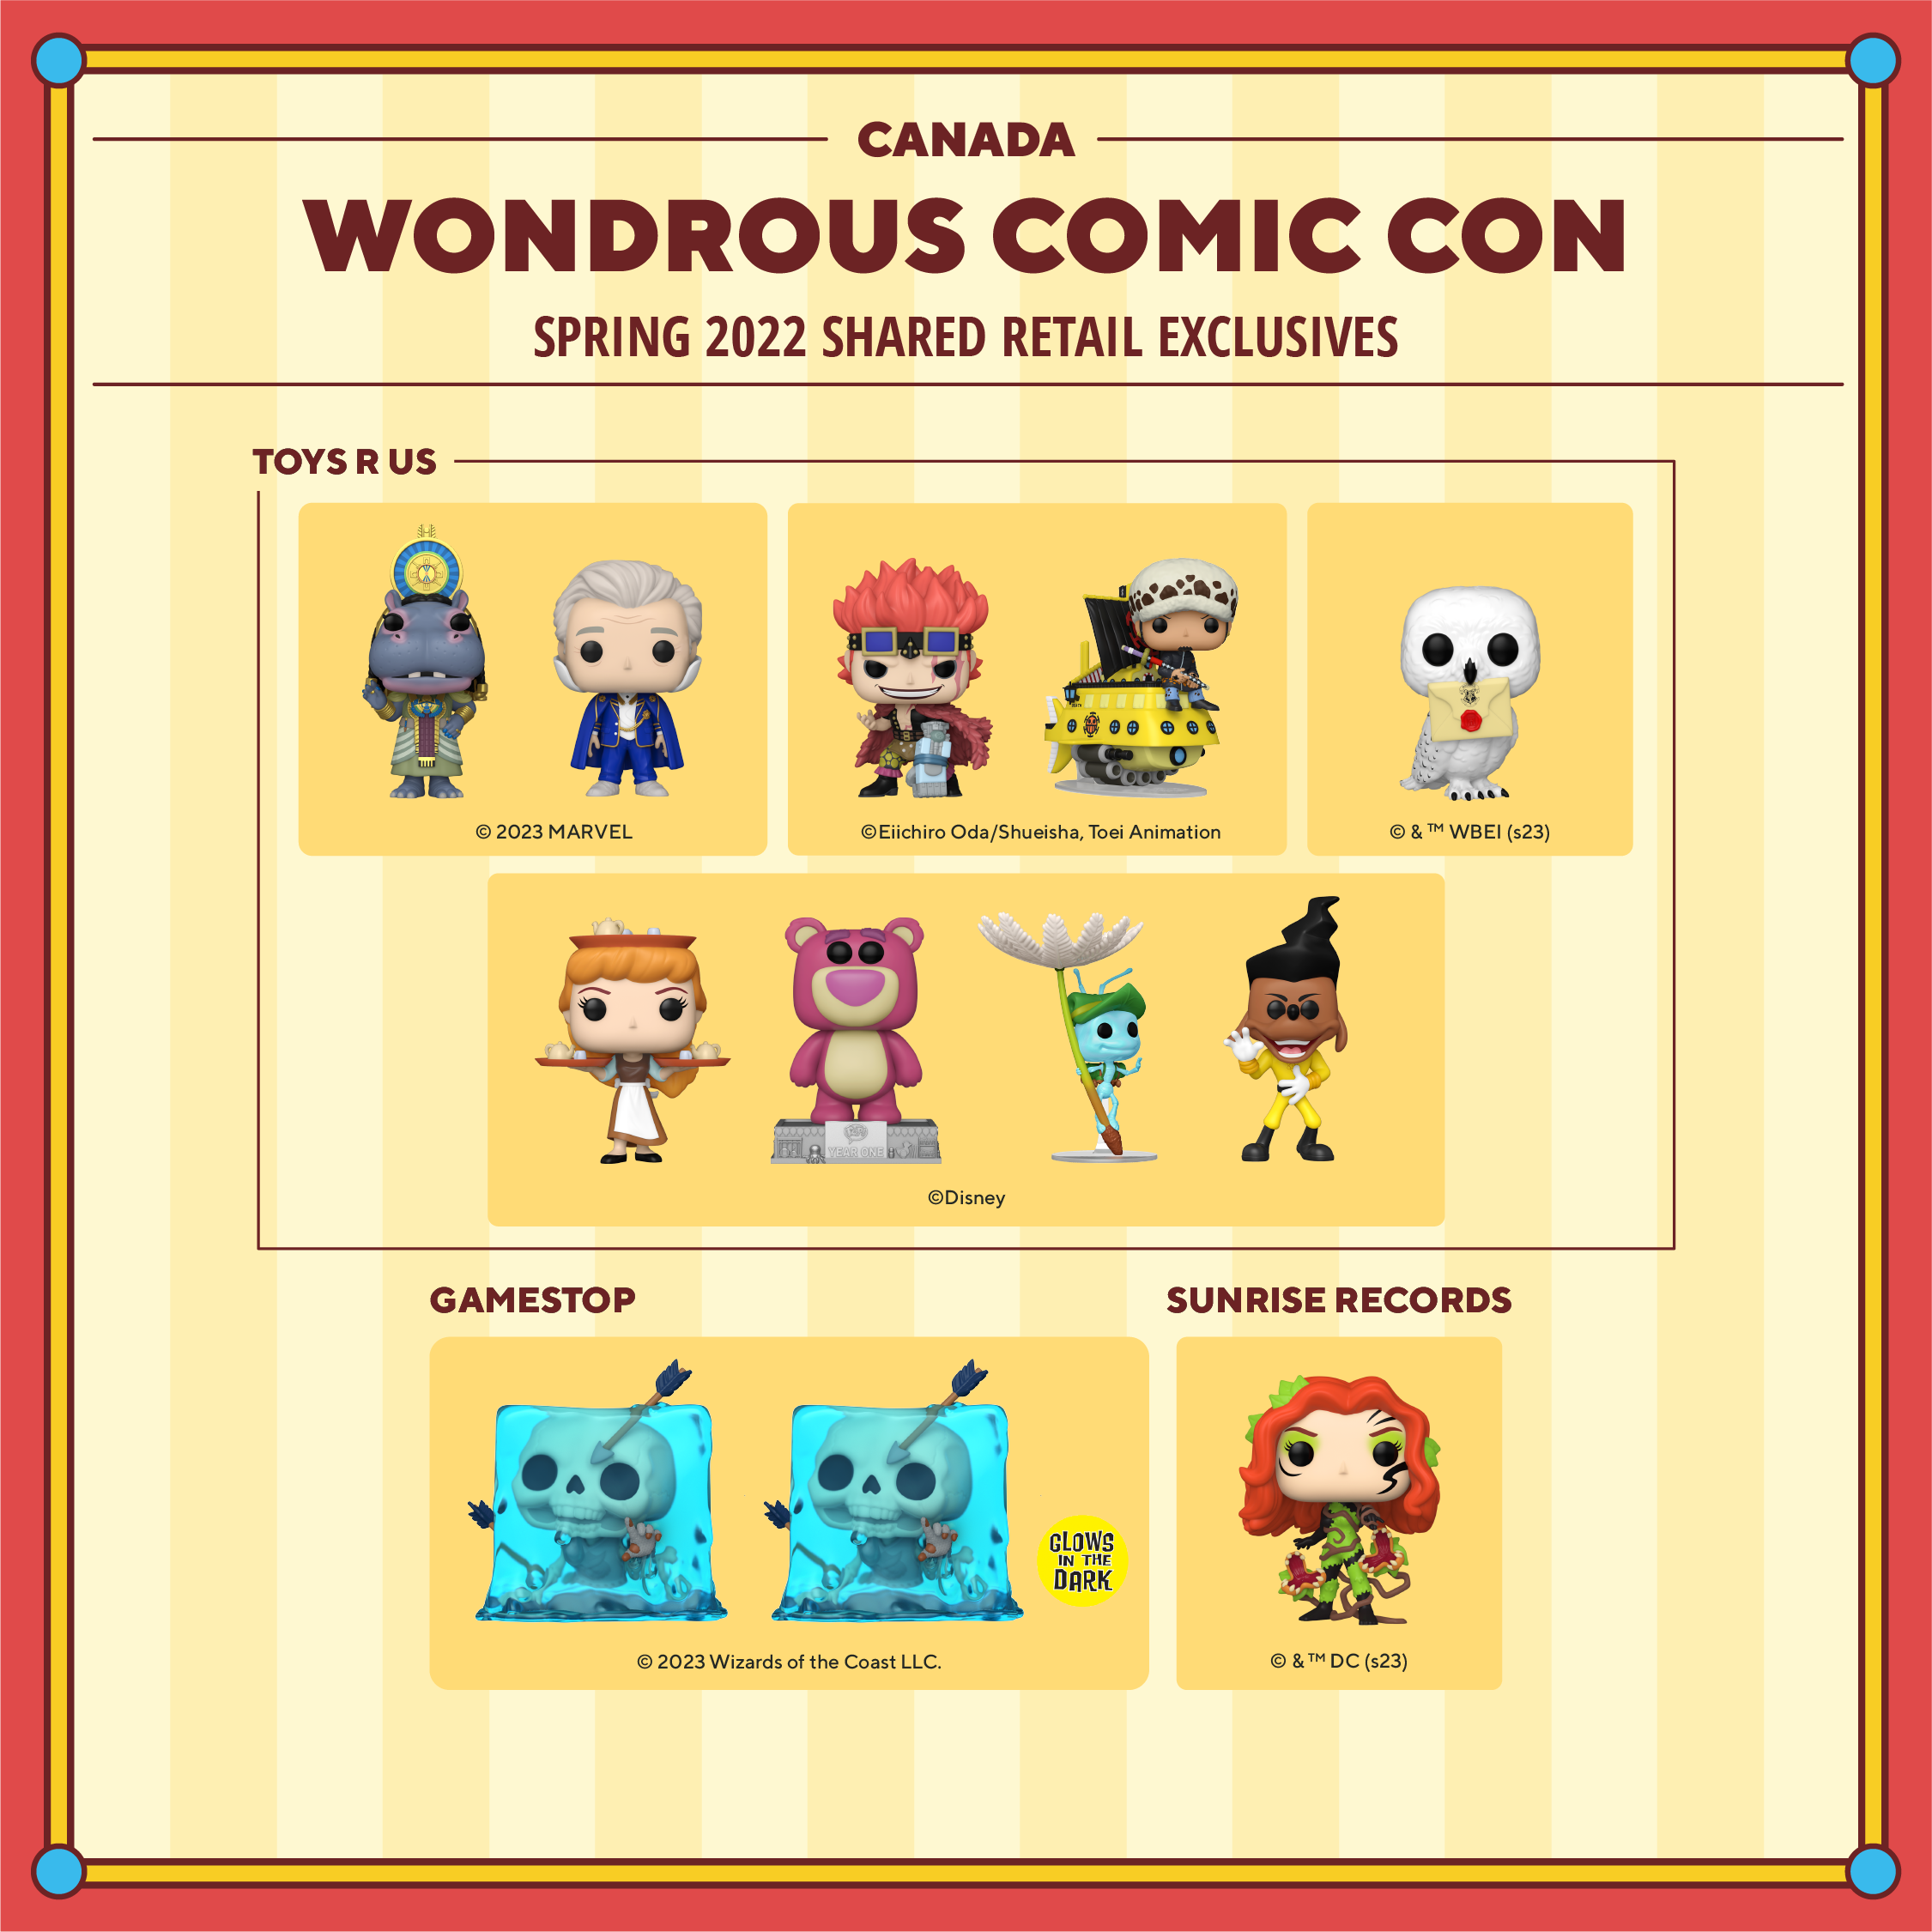 Funko Fun House at WonderCon 2023 Everything You Need to Know